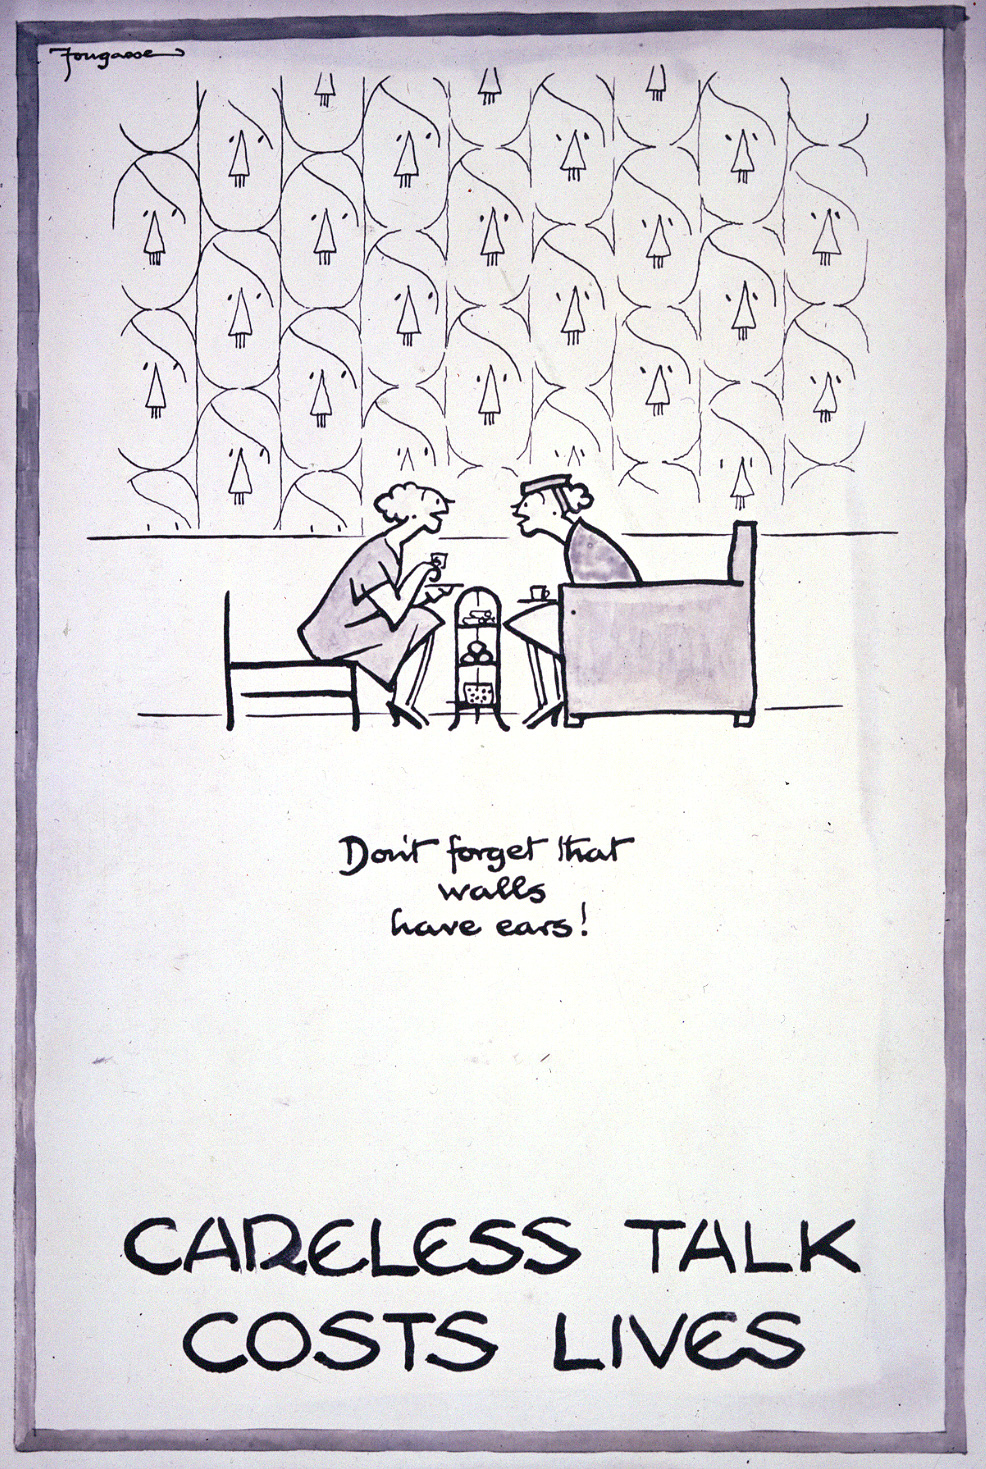 Poster with an illustration of two women chatting over afternoon tea. The wallpaper on the wall next to them is covered in a repeating pattern of Adolf Hitler's face.